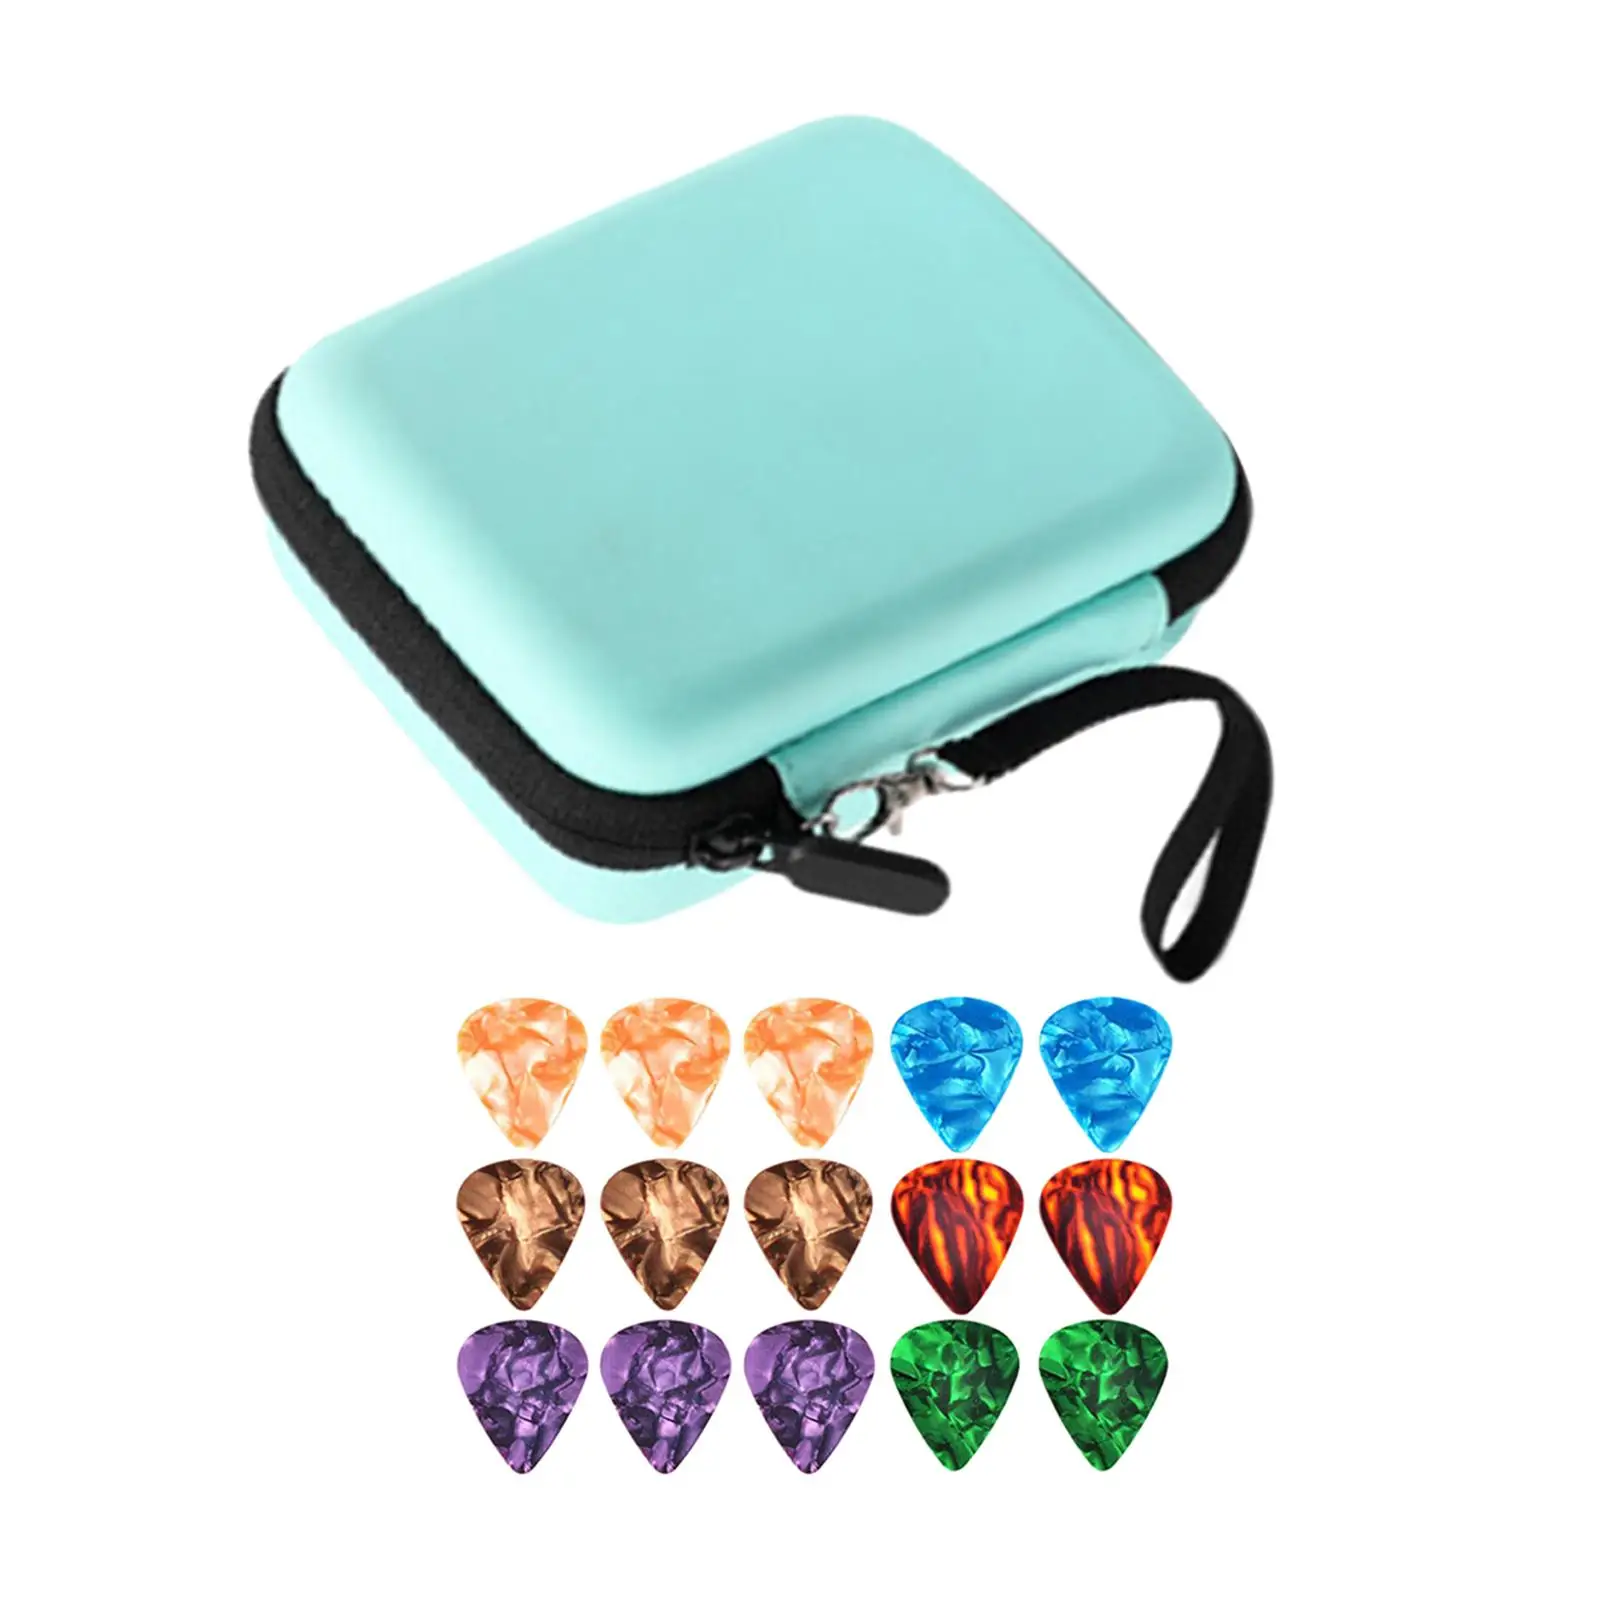 Leather Guitar Picks Holder Case Storage Pouch Box for Acoustic Strings